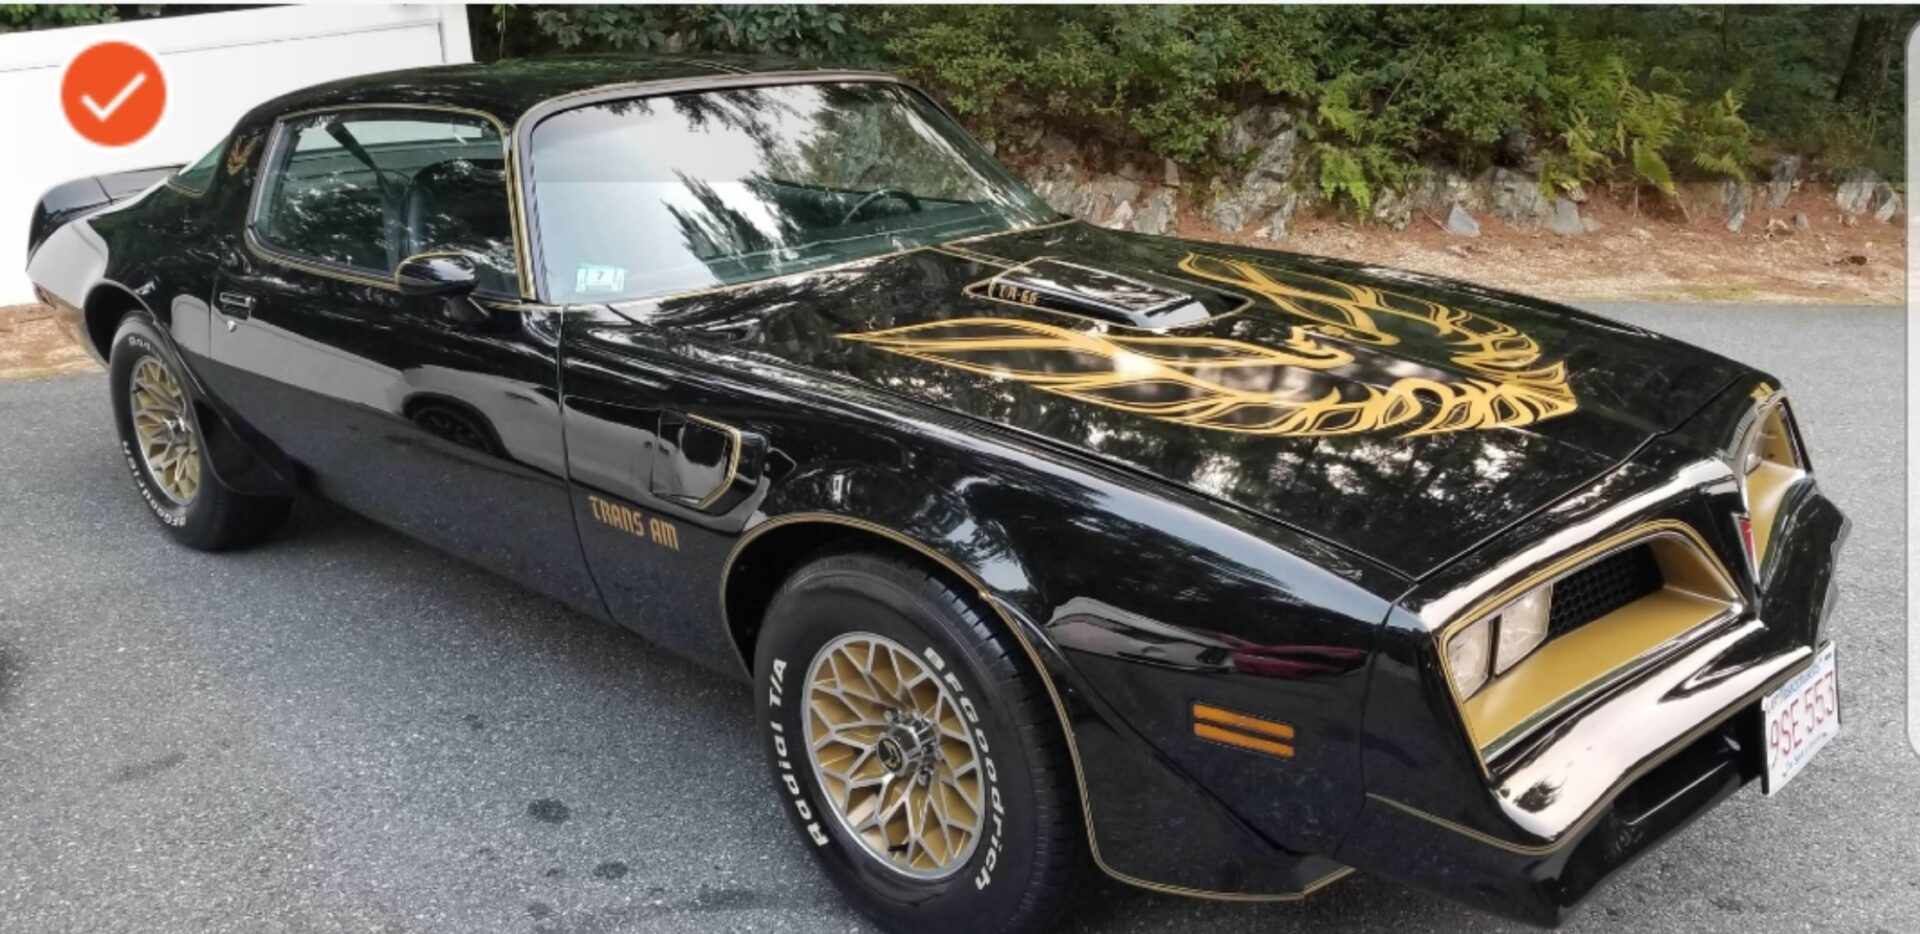 A black and gold car parked on the side of the road.